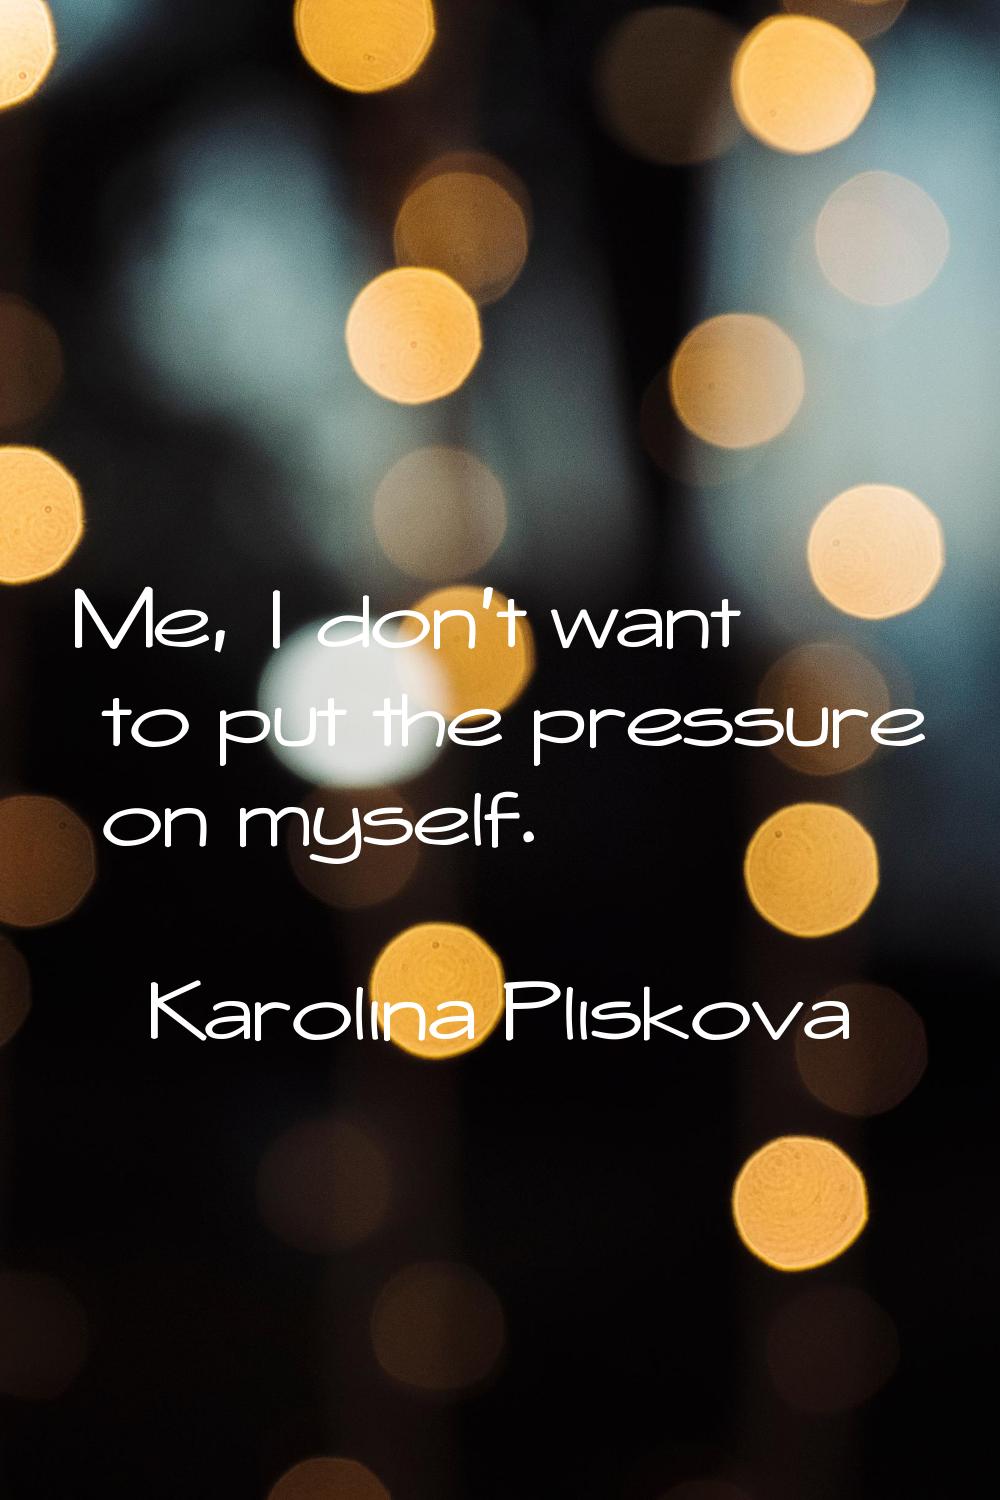 Me, I don't want to put the pressure on myself.